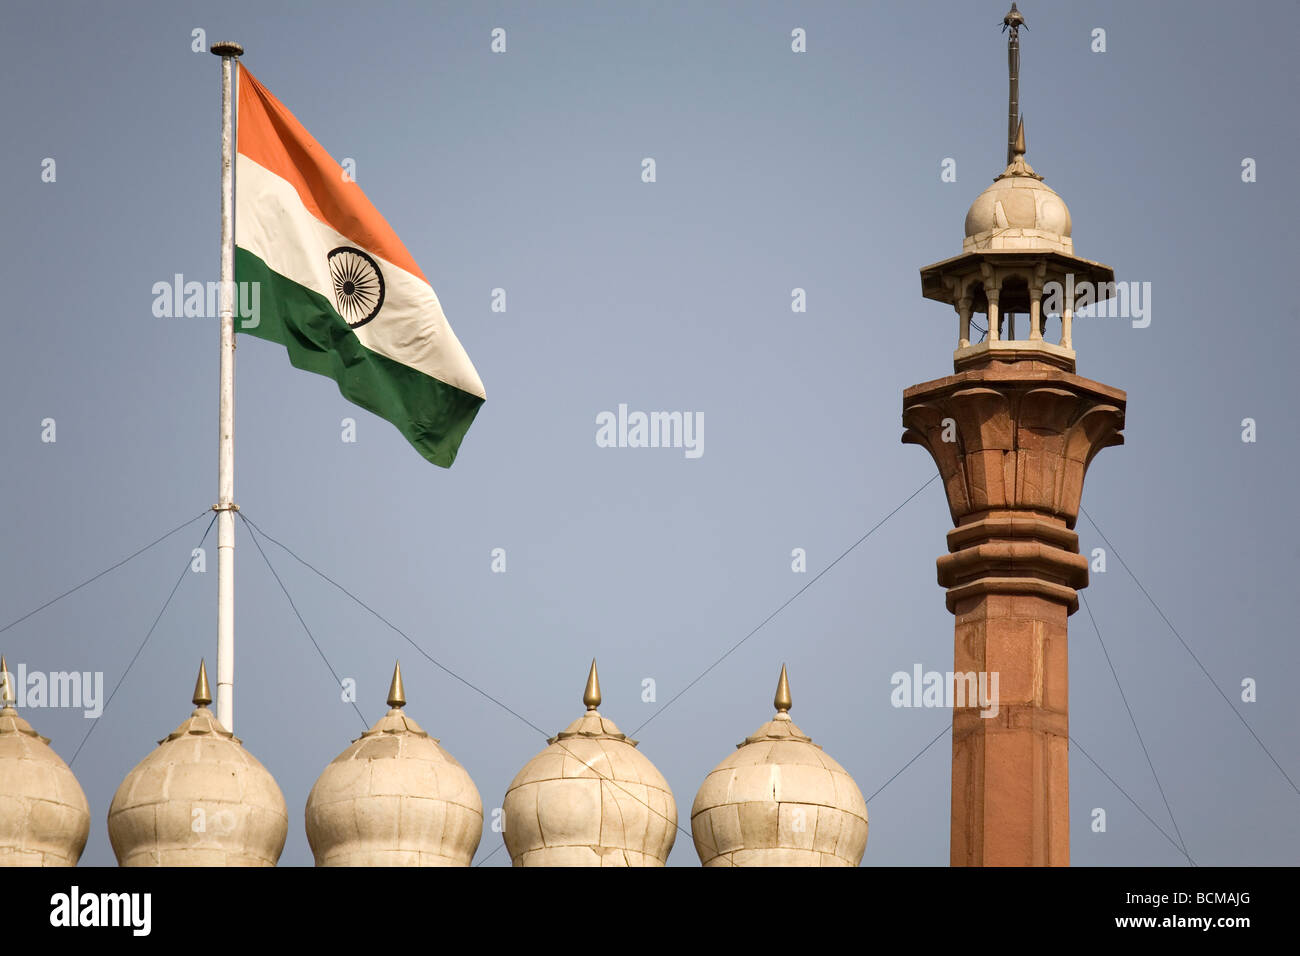 The Indian flag flies above the Lahore Gate of the Red Fort in Old Delhi, India. Stock Photo